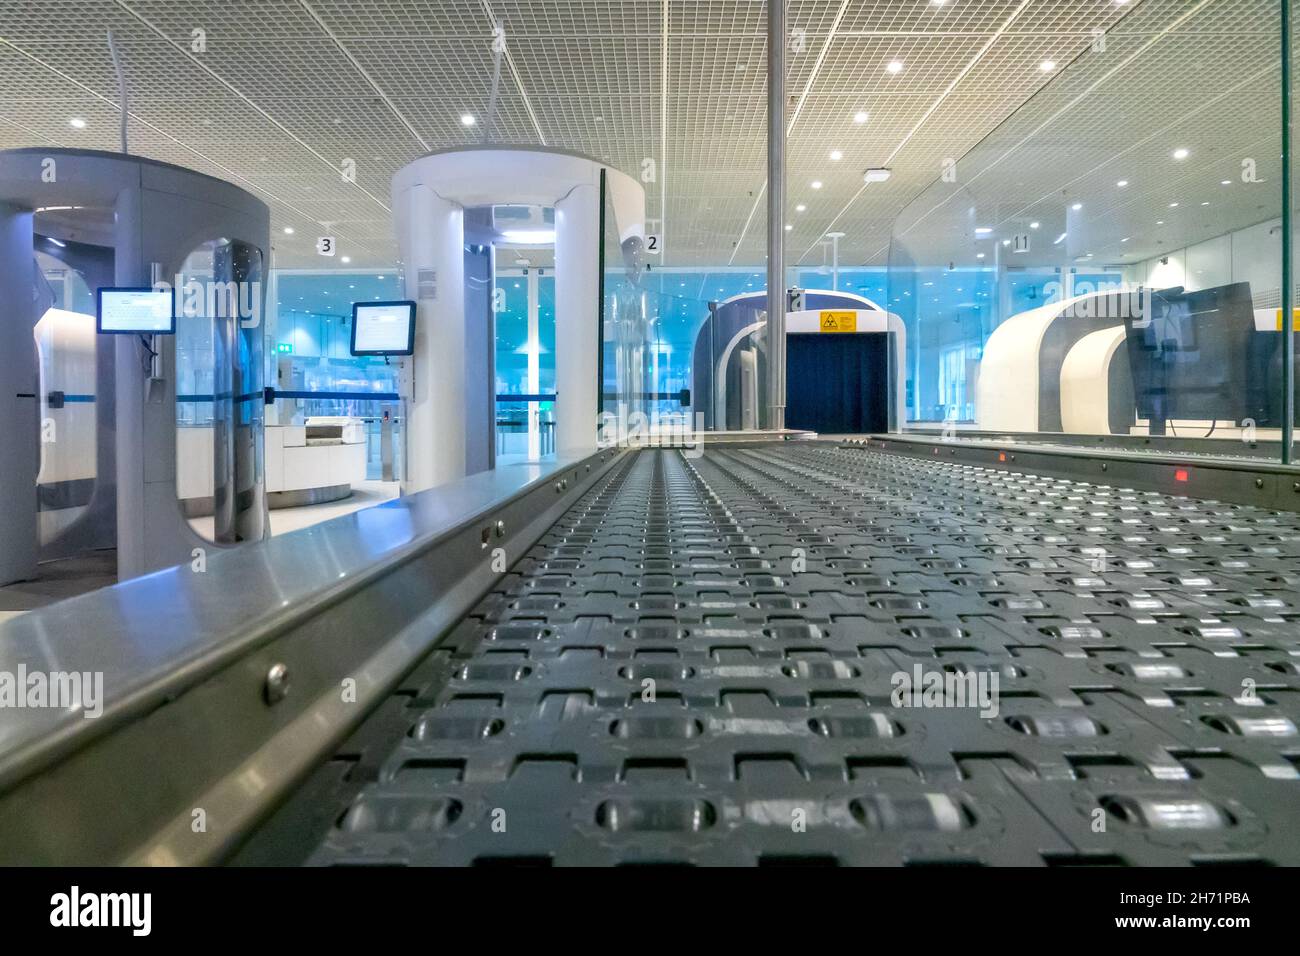 Airport security checkpoint with x-ray scanners for baggage and people. No people Stock Photo